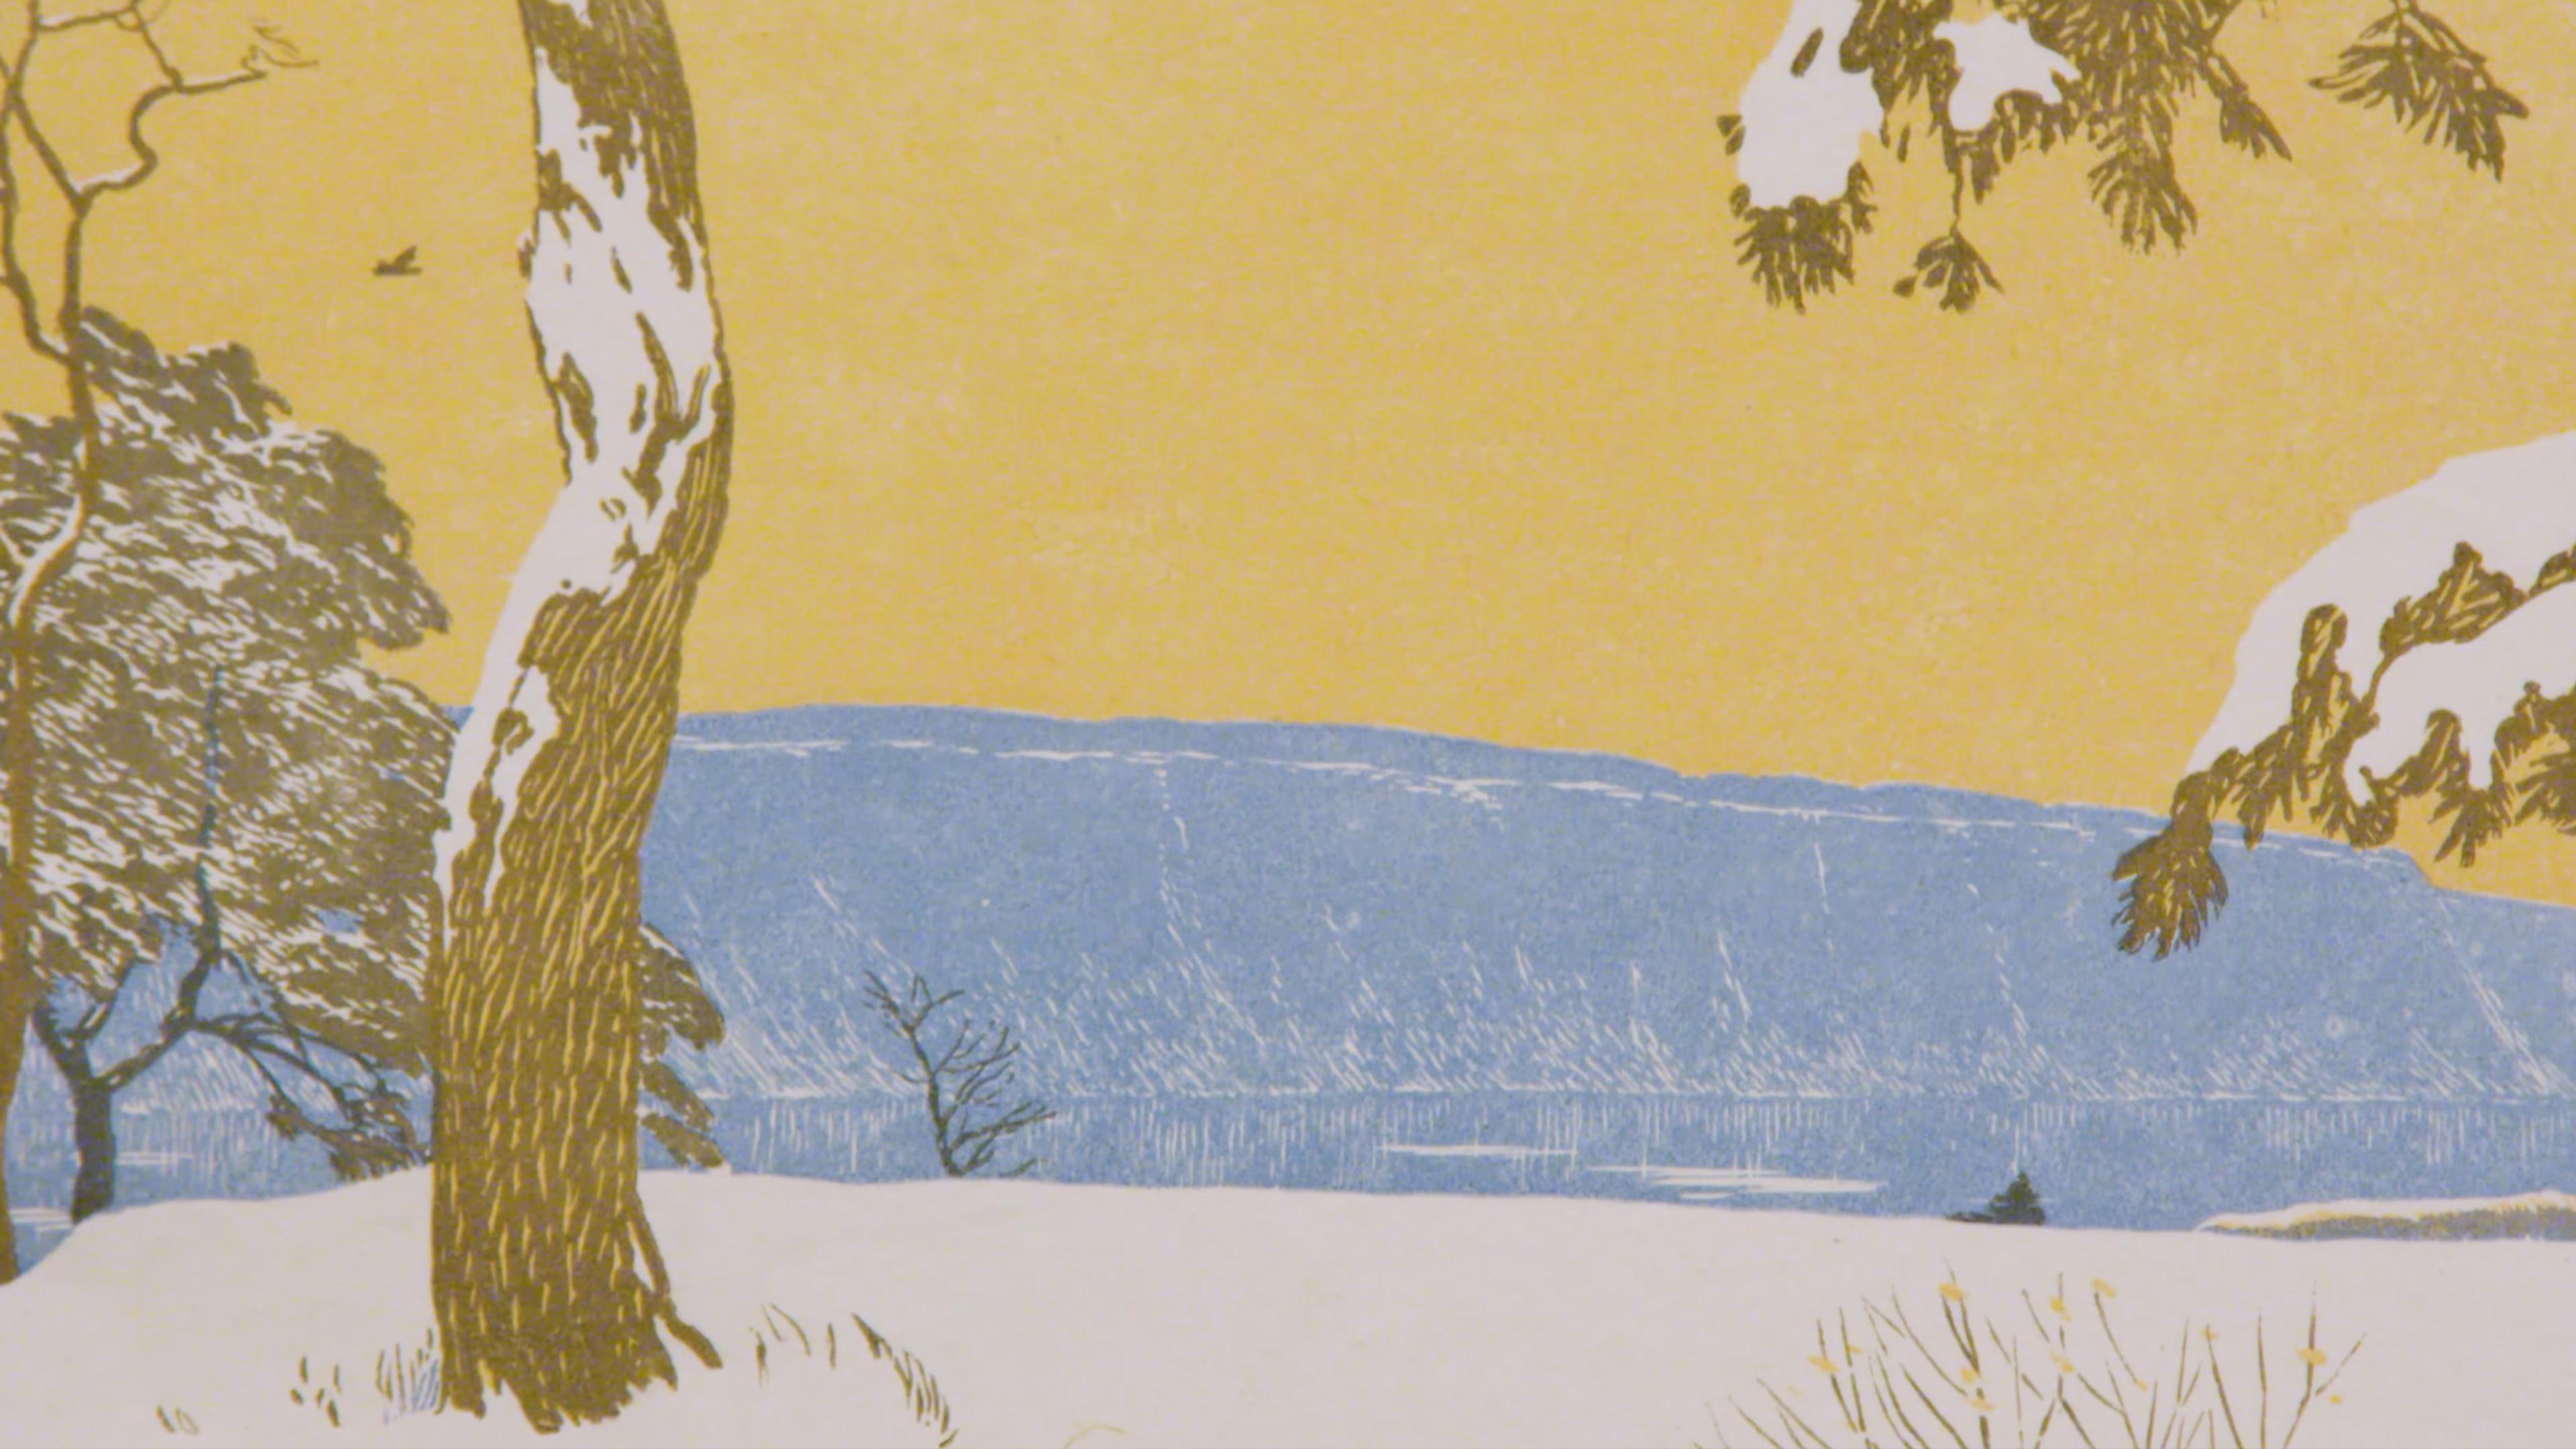 A serene landscape of snowy trees and hills set against a backdrop of a yellow sky and blue mountain range, with a bird flying by.